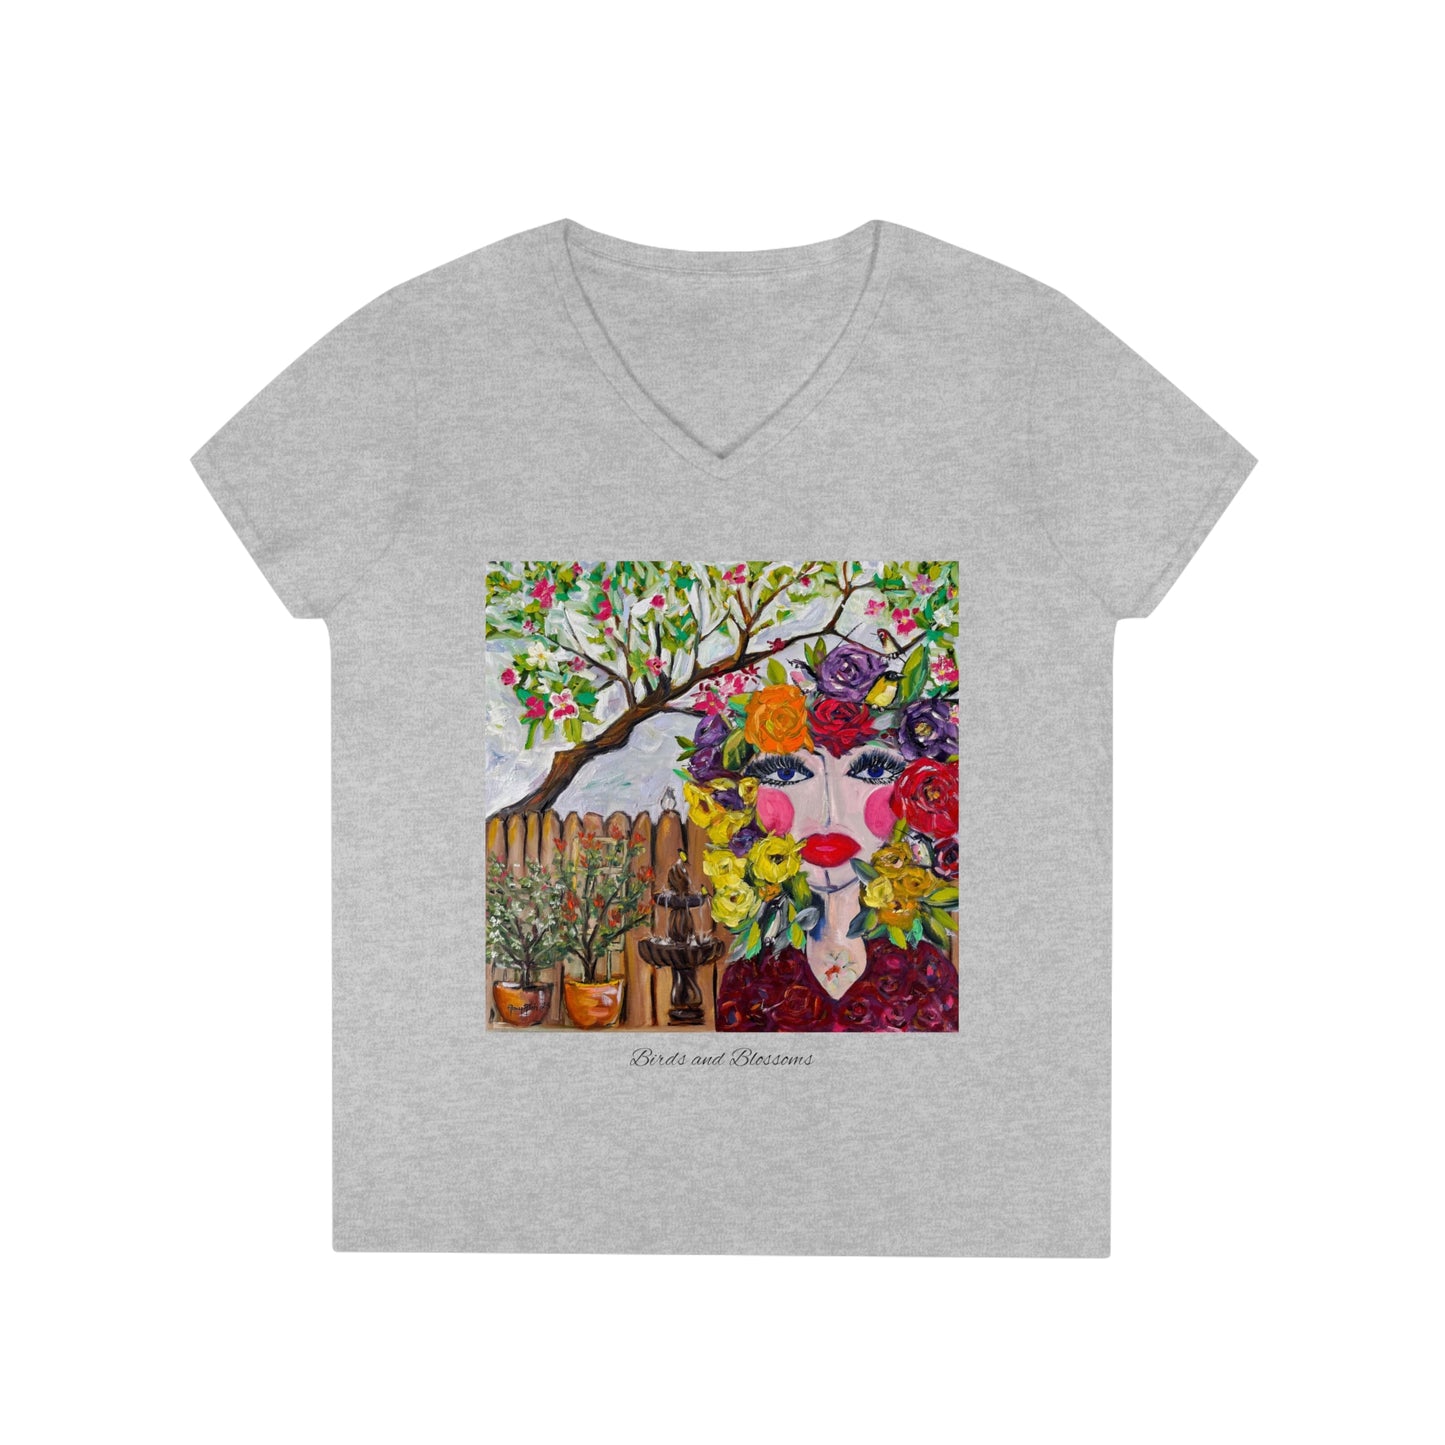 Birds and Blossoms Ladies' V-Neck T-Shirt